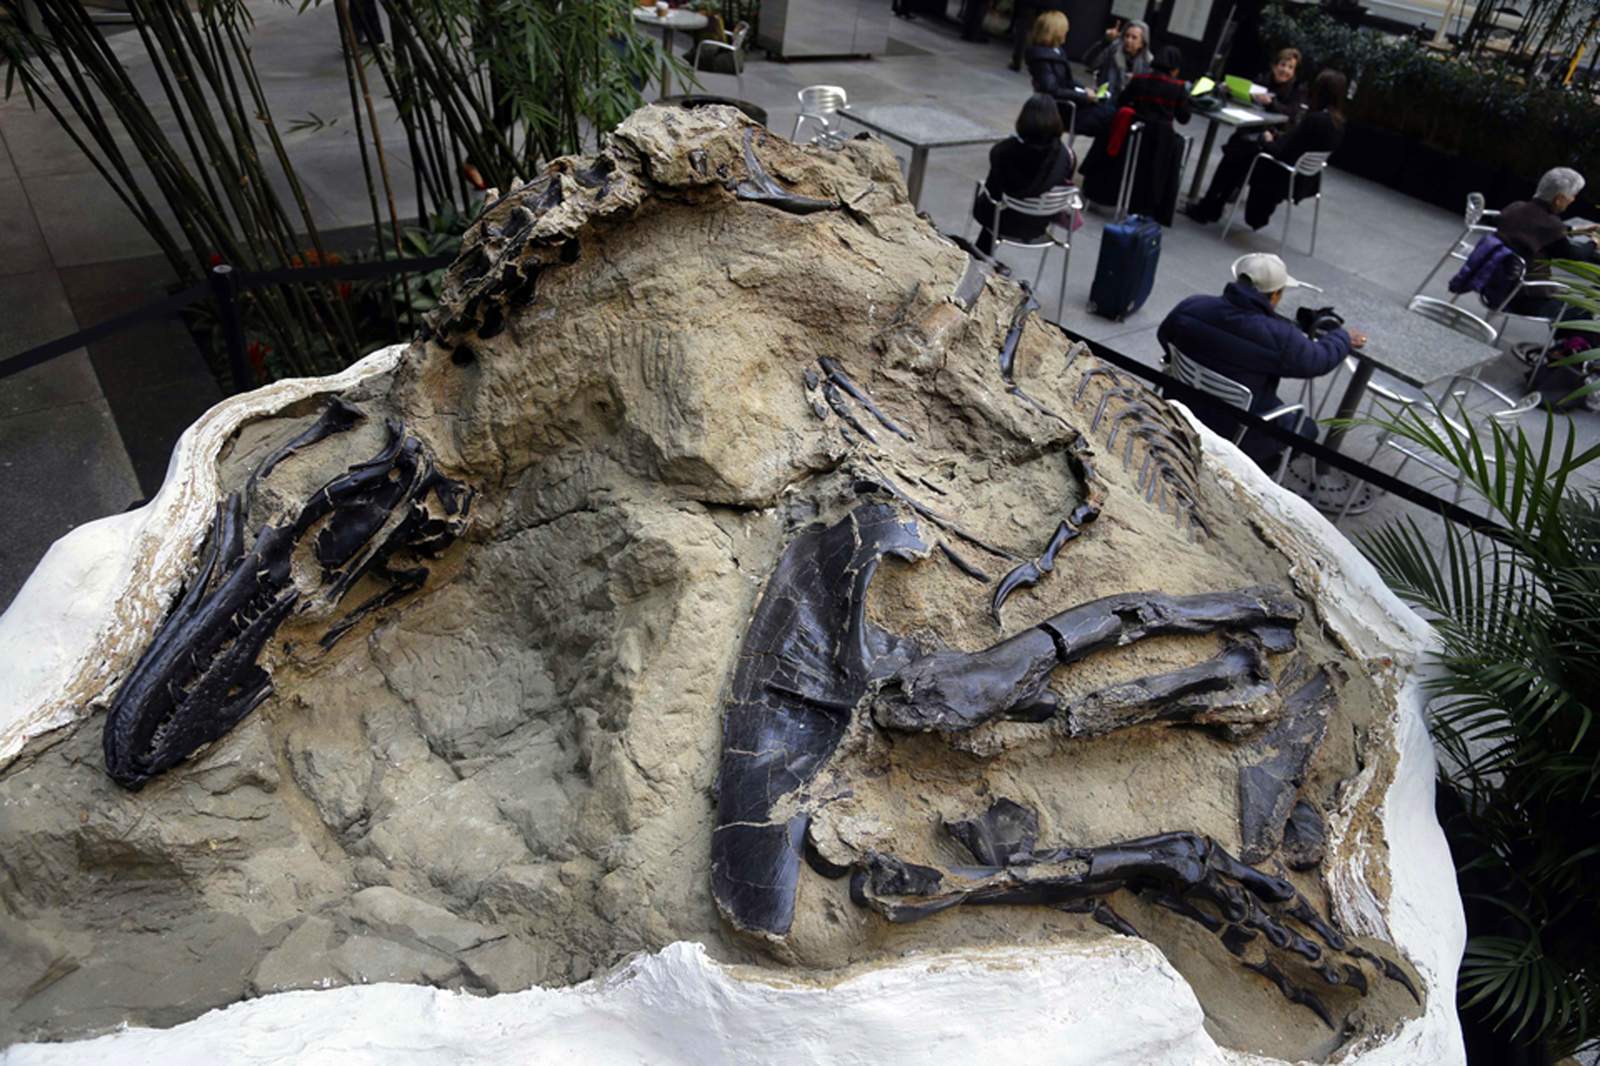 ‘Dueling dinosaurs’ fossils donated to North Carolina museum